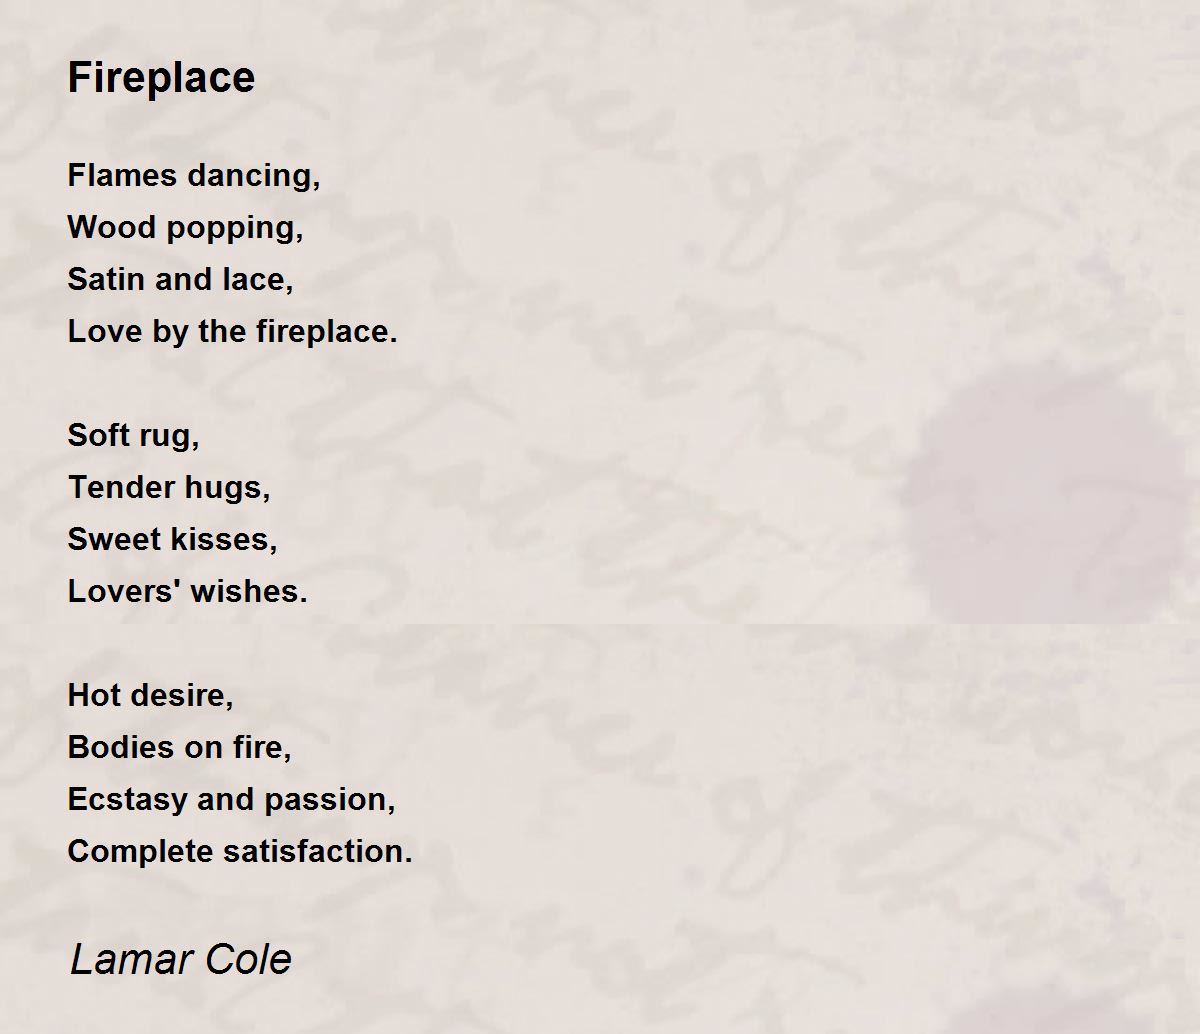 creative writing about a fireplace